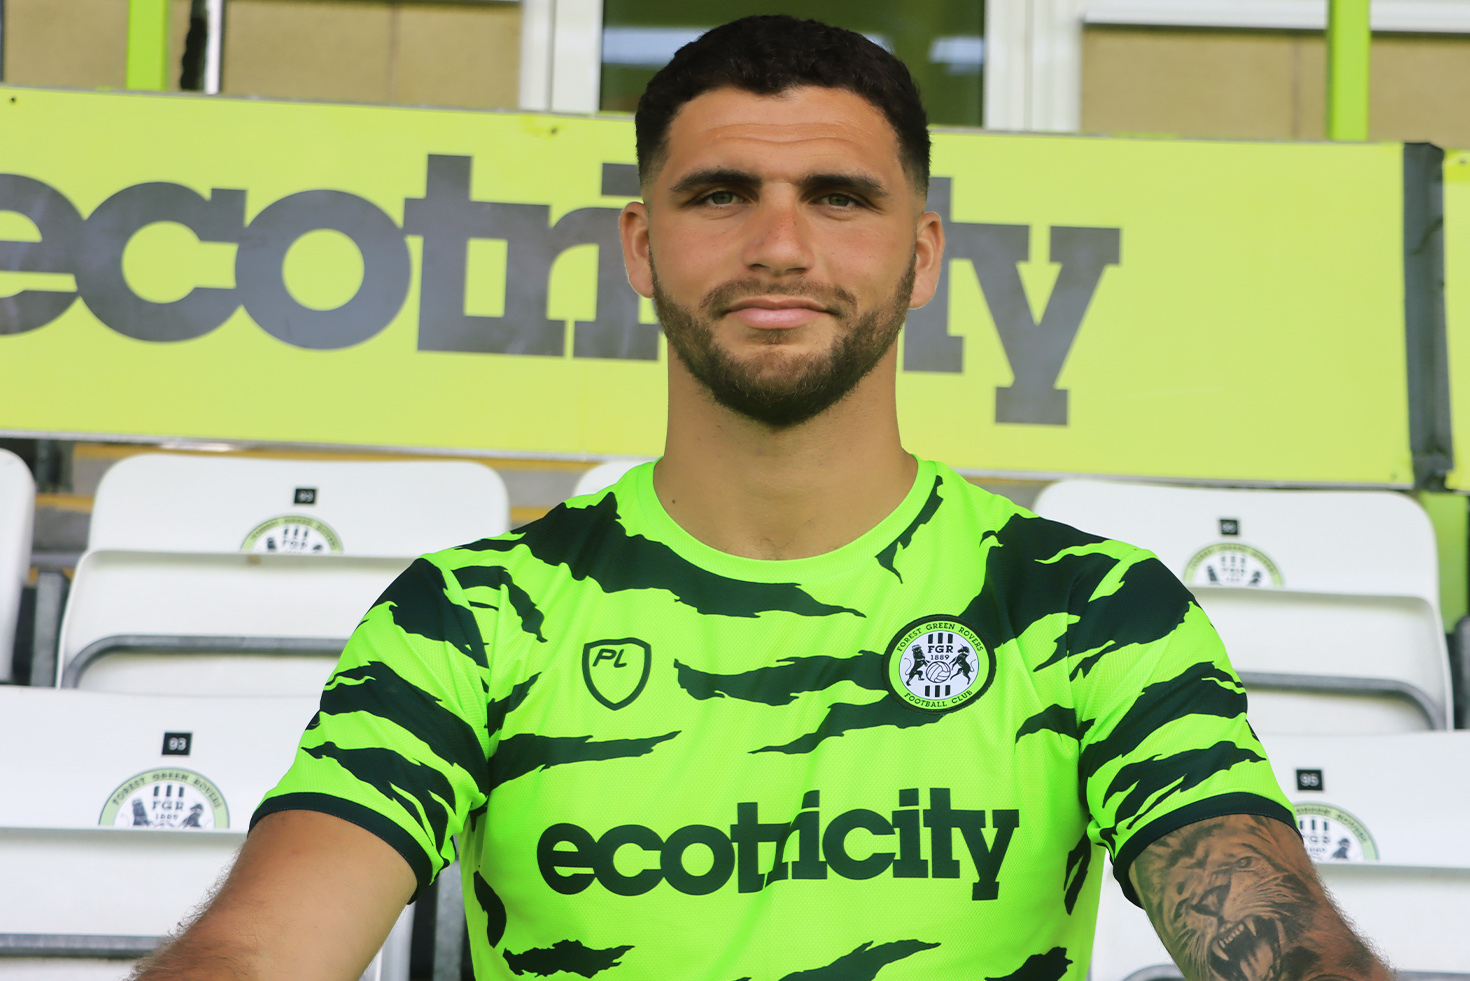 The goal is promotion, insists new Forest Green signing